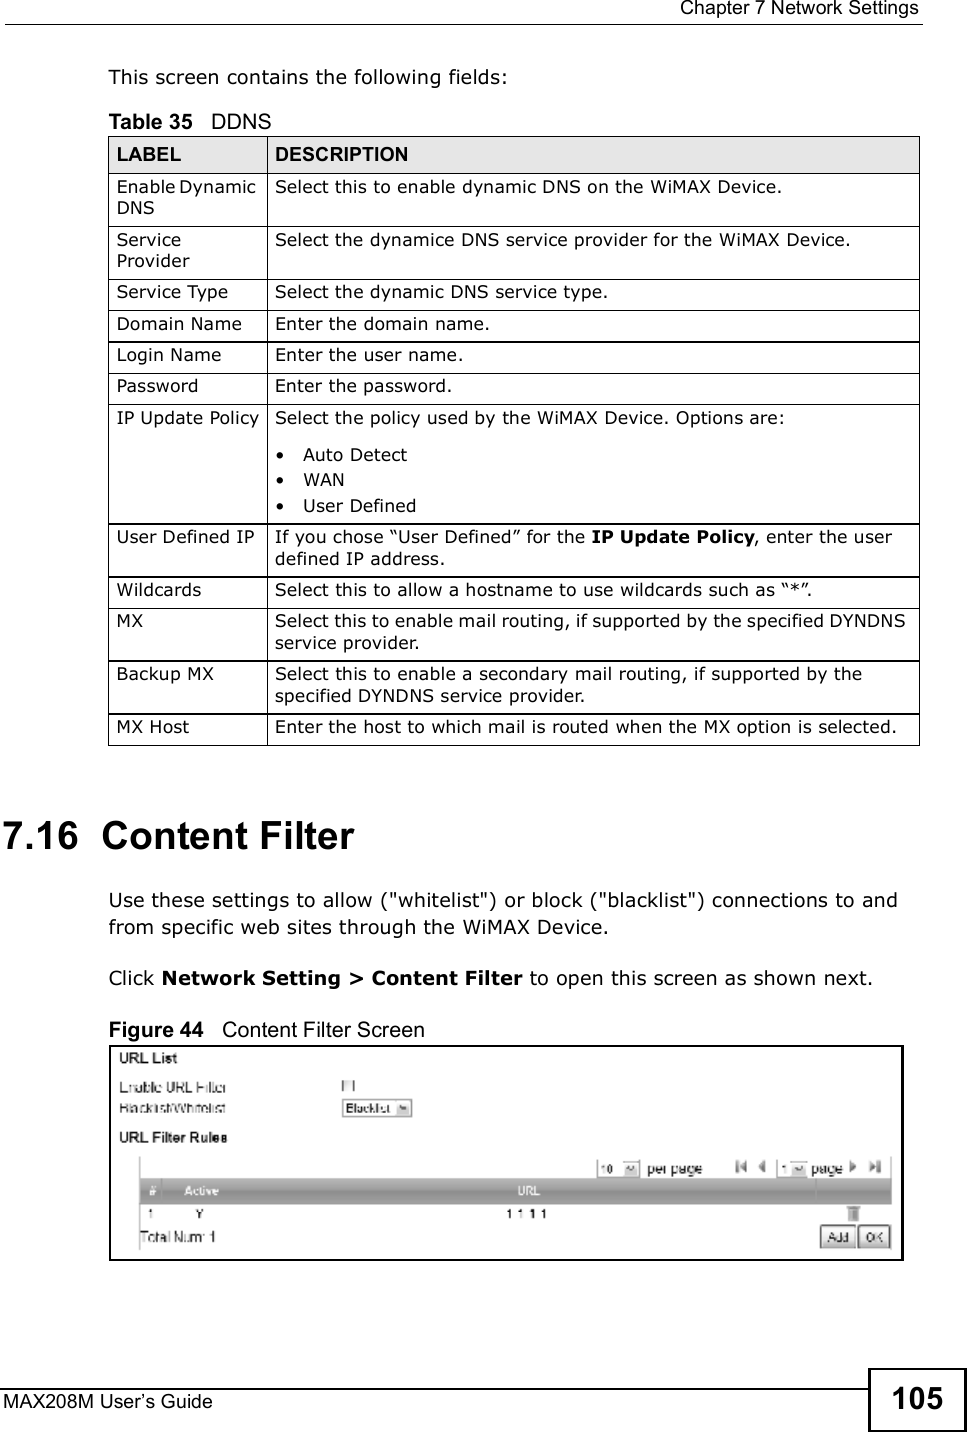  Chapter 7Network SettingsMAX208M User s Guide 105This screen contains the following fields:7.16  Content FilterUse these settings to allow (&quot;whitelist&quot;) or block (&quot;blacklist&quot;) connections to and from specific web sites through the WiMAX Device.Click Network Setting &gt; Content Filter to open this screen as shown next.Figure 44   Content Filter ScreenTable 35   DDNSLABEL DESCRIPTIONEnable Dynamic DNSSelect this to enable dynamic DNS on the WiMAX Device.Service ProviderSelect the dynamice DNS service provider for the WiMAX Device.Service TypeSelect the dynamic DNS service type.Domain NameEnter the domain name.Login NameEnter the user name.PasswordEnter the password.IP Update PolicySelect the policy used by the WiMAX Device. Options are:!Auto Detect!WAN!User DefinedUser Defined IPIf you chose &quot;User Defined# for the IP Update Policy, enter the user defined IP address.WildcardsSelect this to allow a hostname to use wildcards such as &quot;*#.MXSelect this to enable mail routing, if supported by the specified DYNDNS service provider.Backup MXSelect this to enable a secondary mail routing, if supported by the specified DYNDNS service provider.MX HostEnter the host to which mail is routed when the MX option is selected.